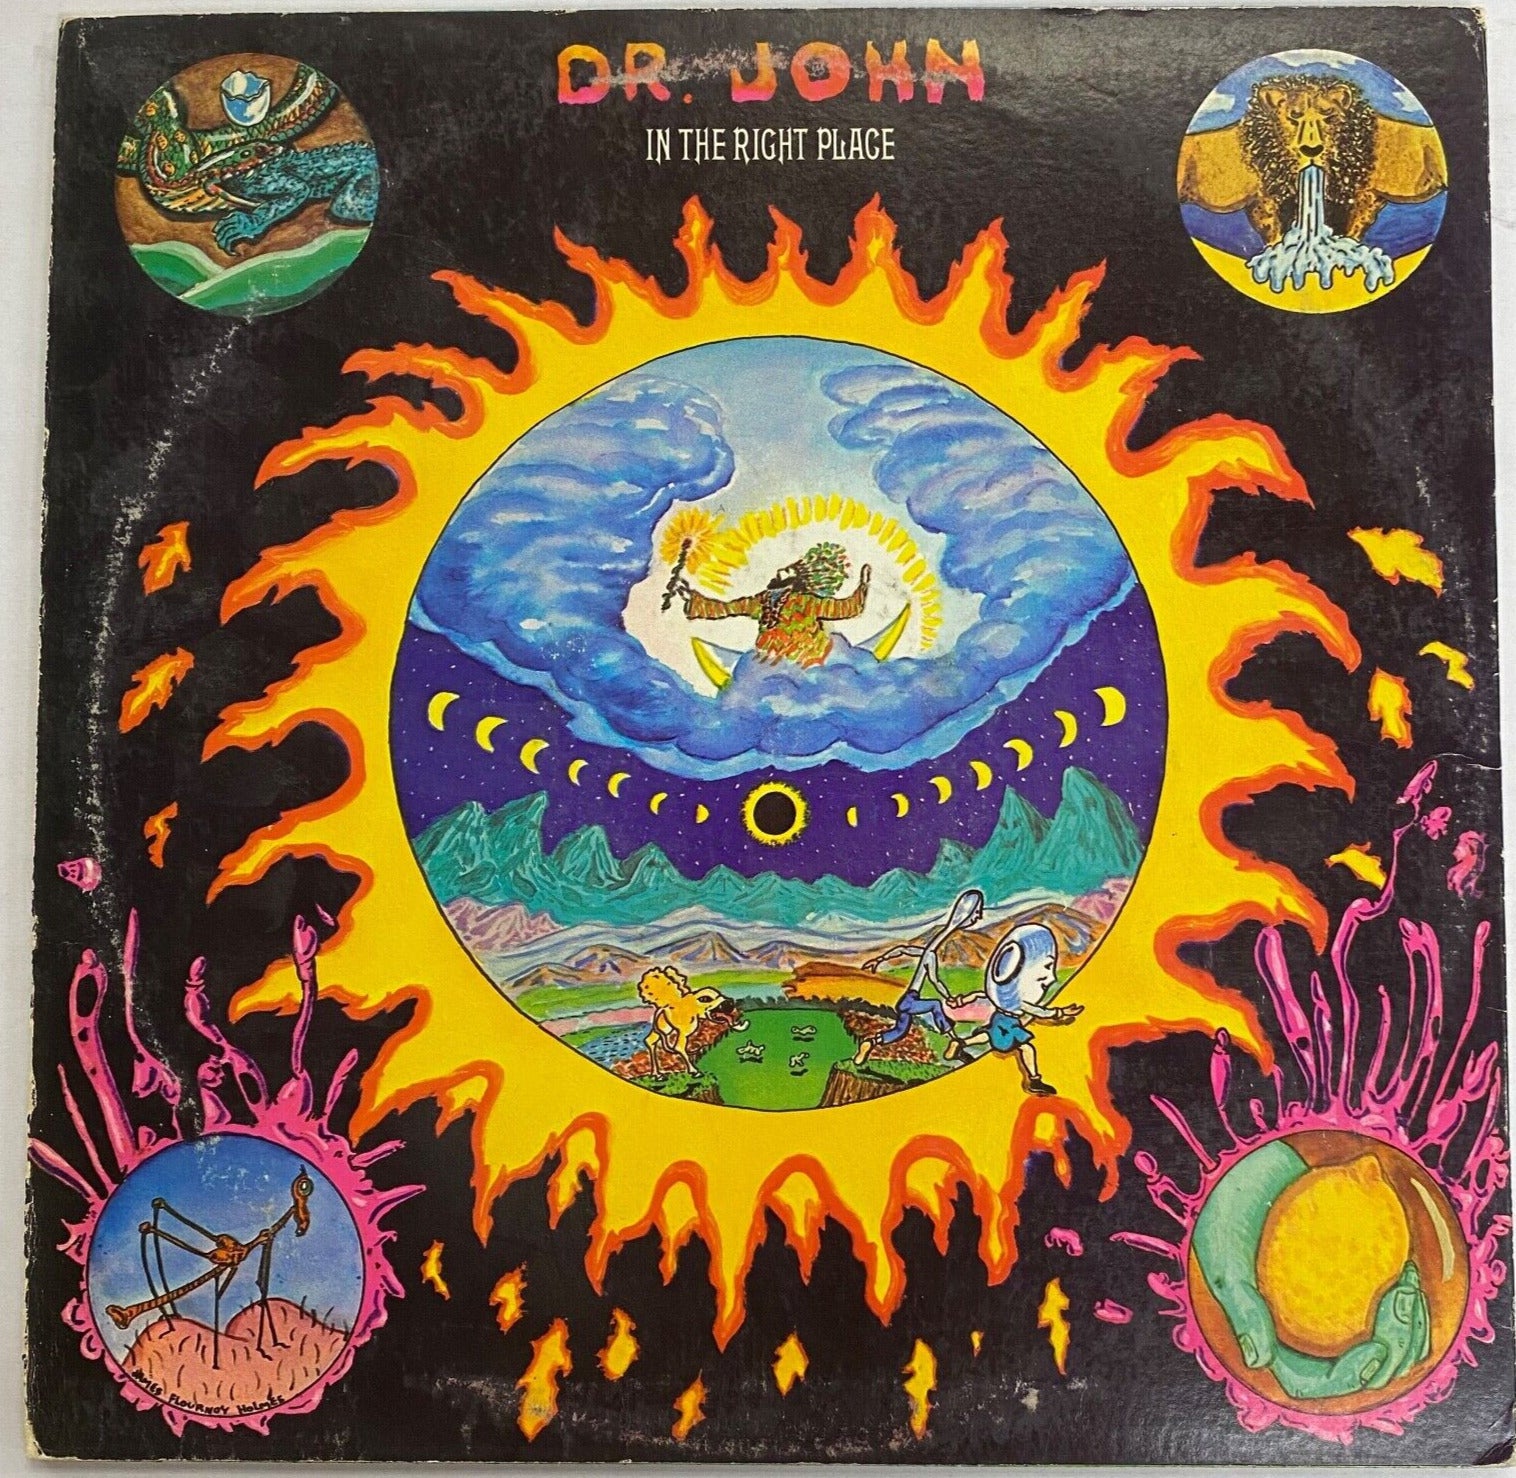 Dr. John - In The Right Place LP - Atco 1973